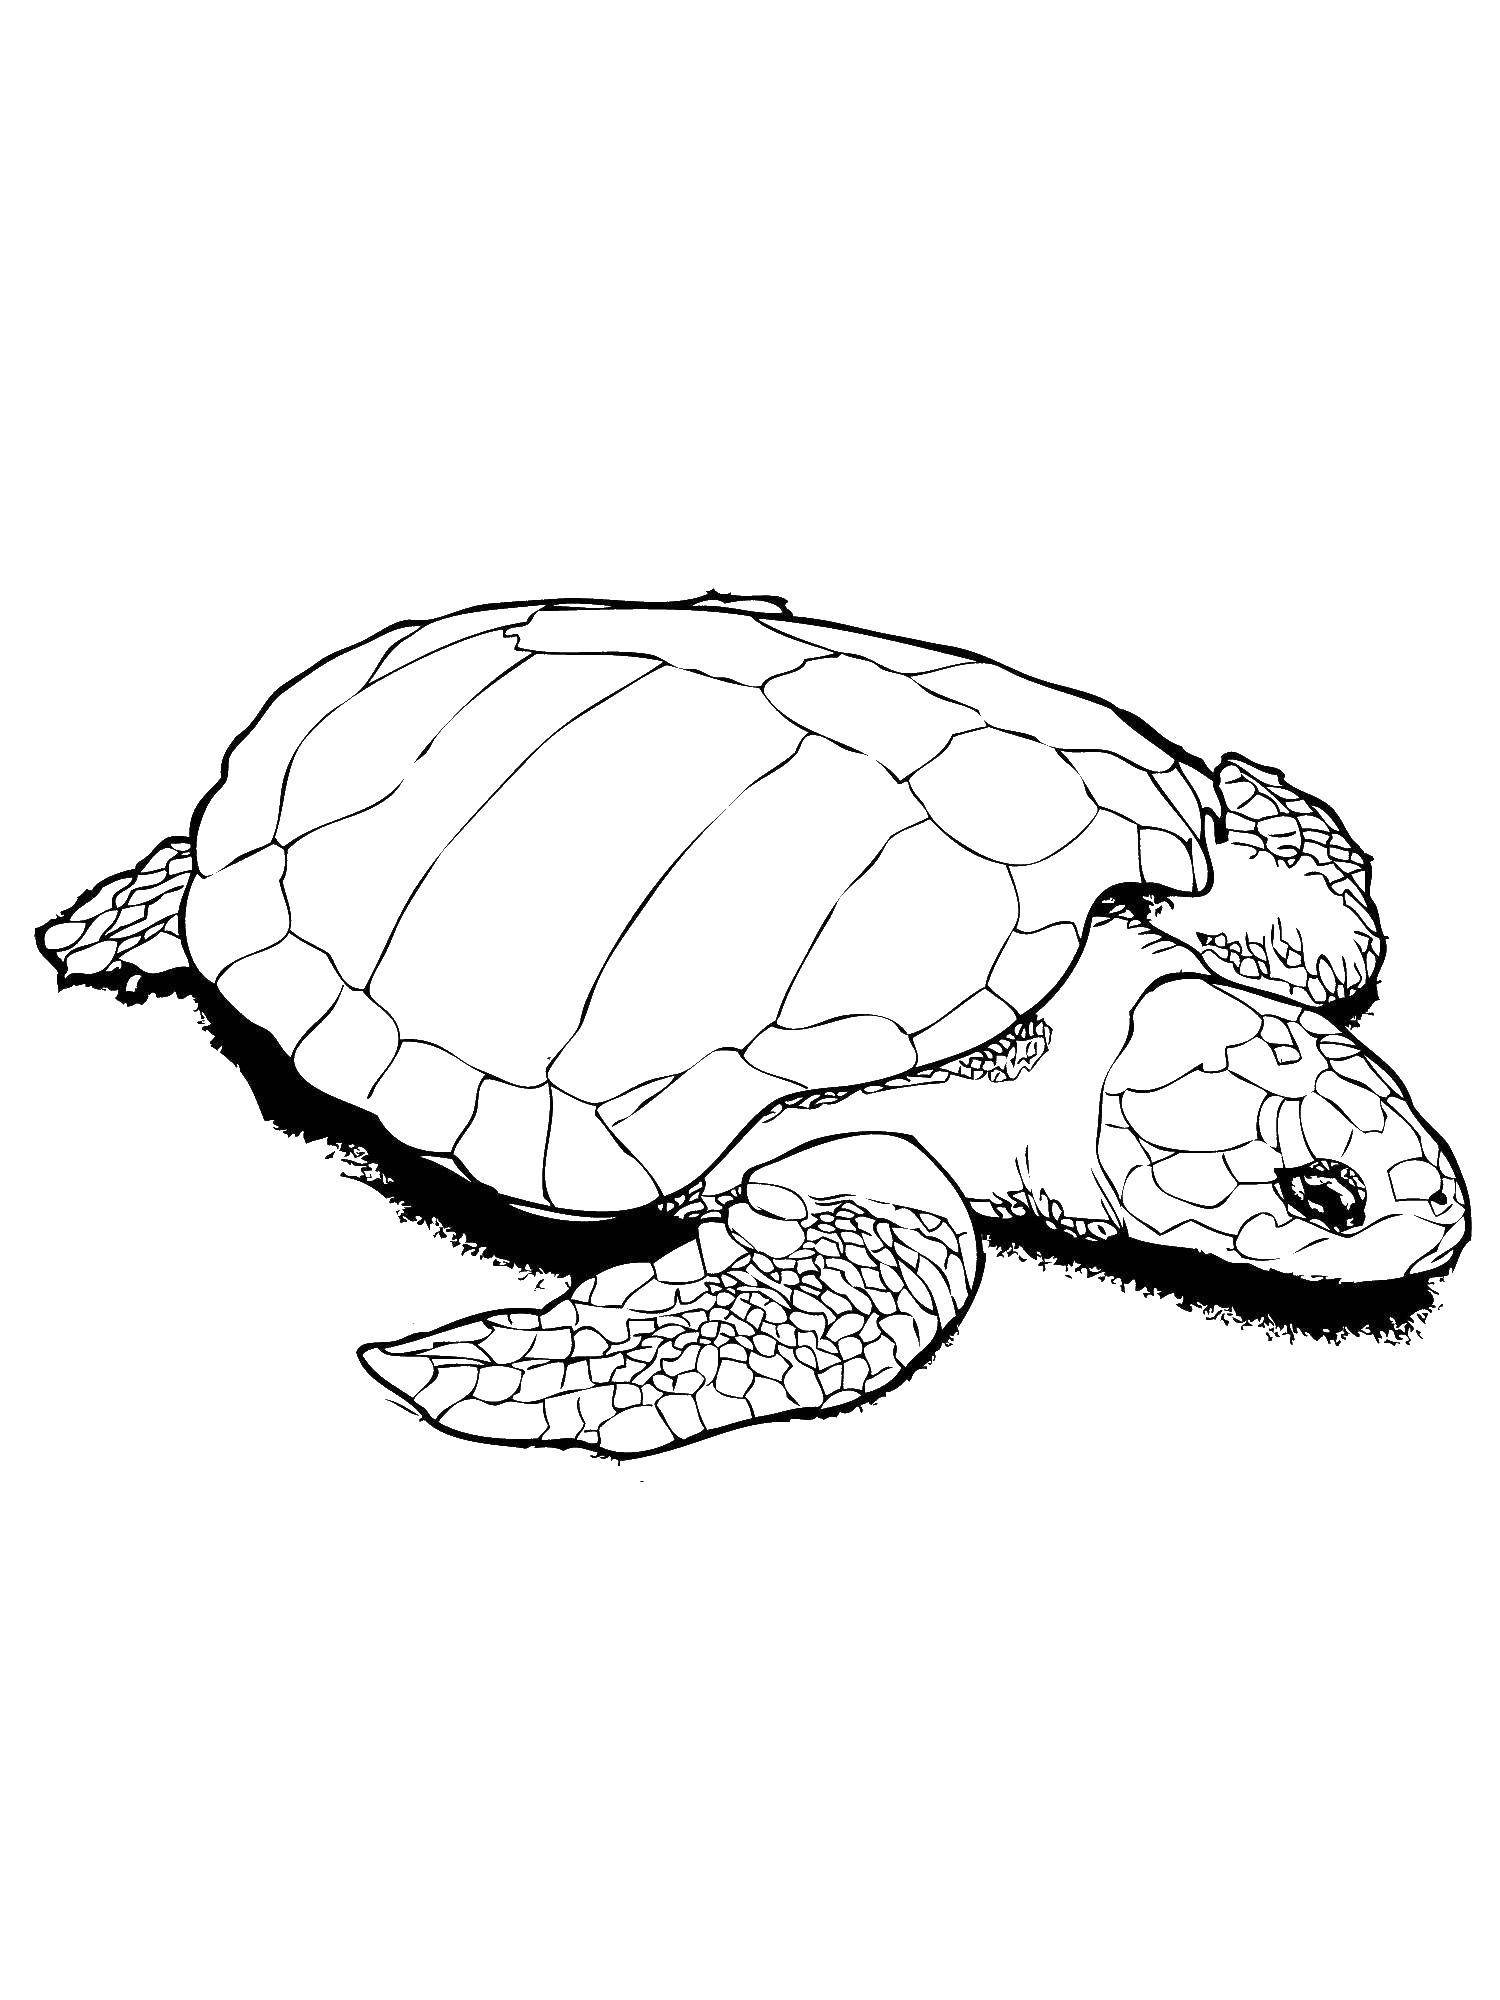 Coloring Turtle. Category coloring. Tags:  Turtle.